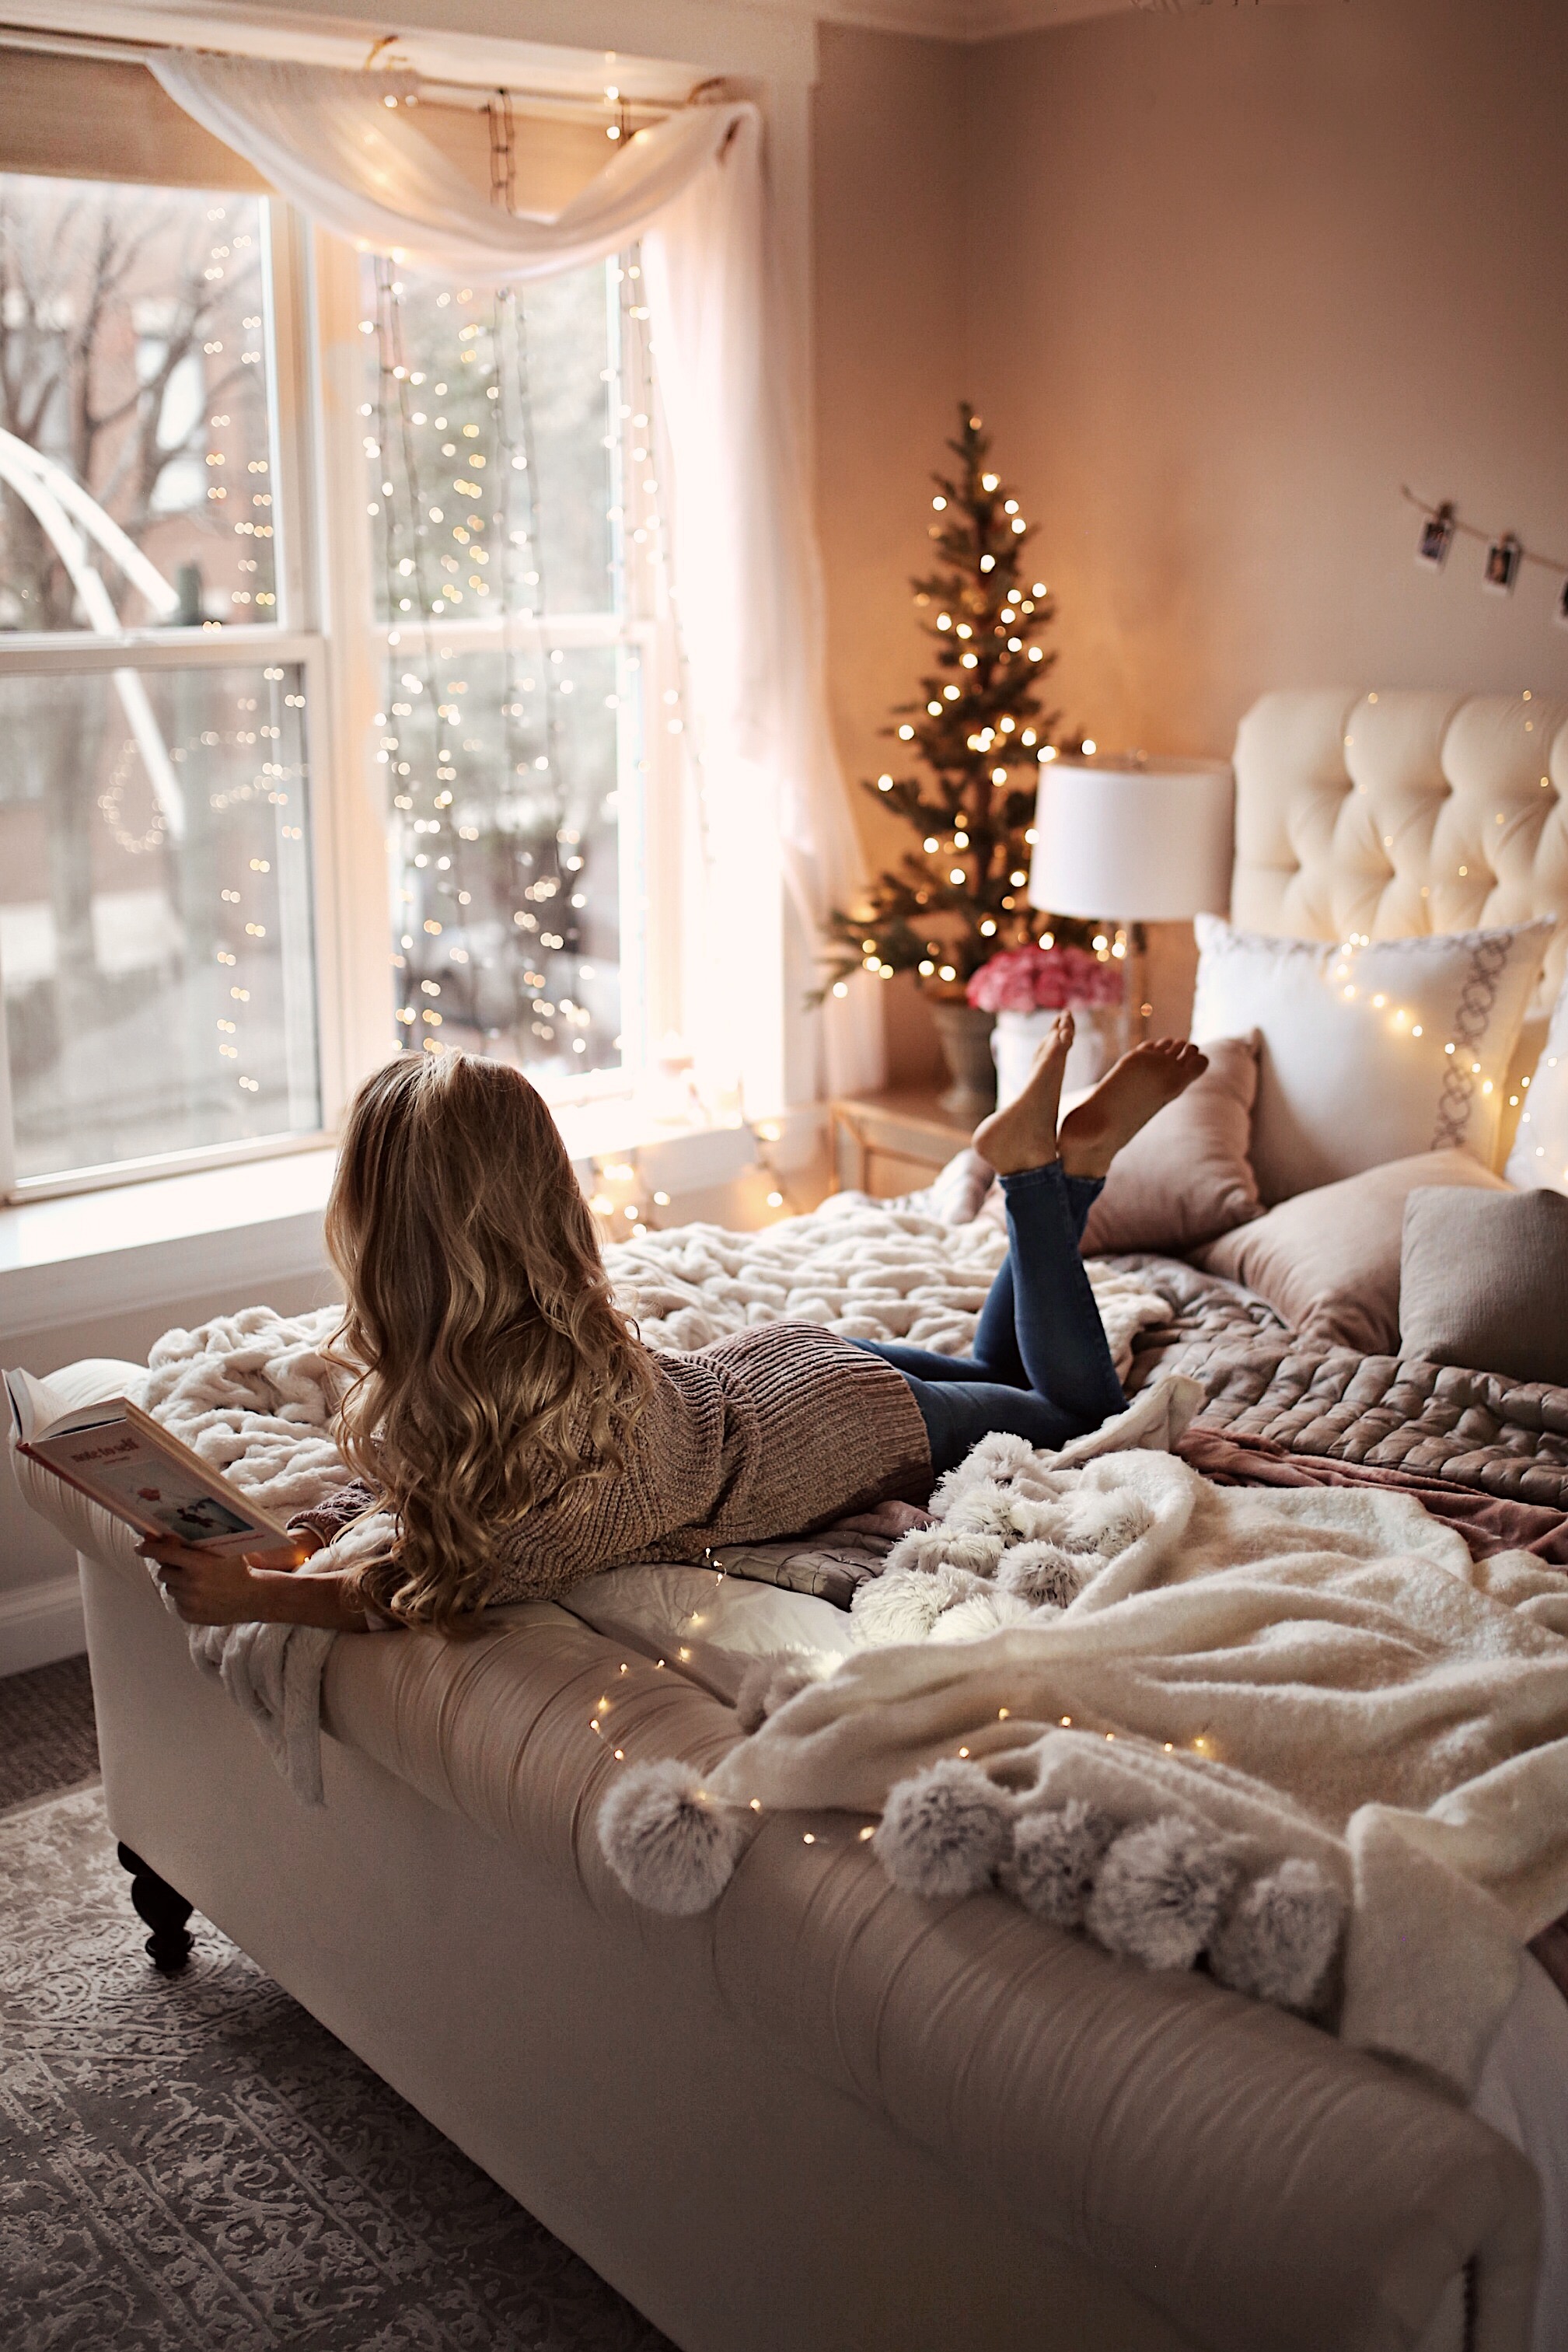 7 Holiday Decor Ideas for Your Bedroom - Welcome to Olivia ...